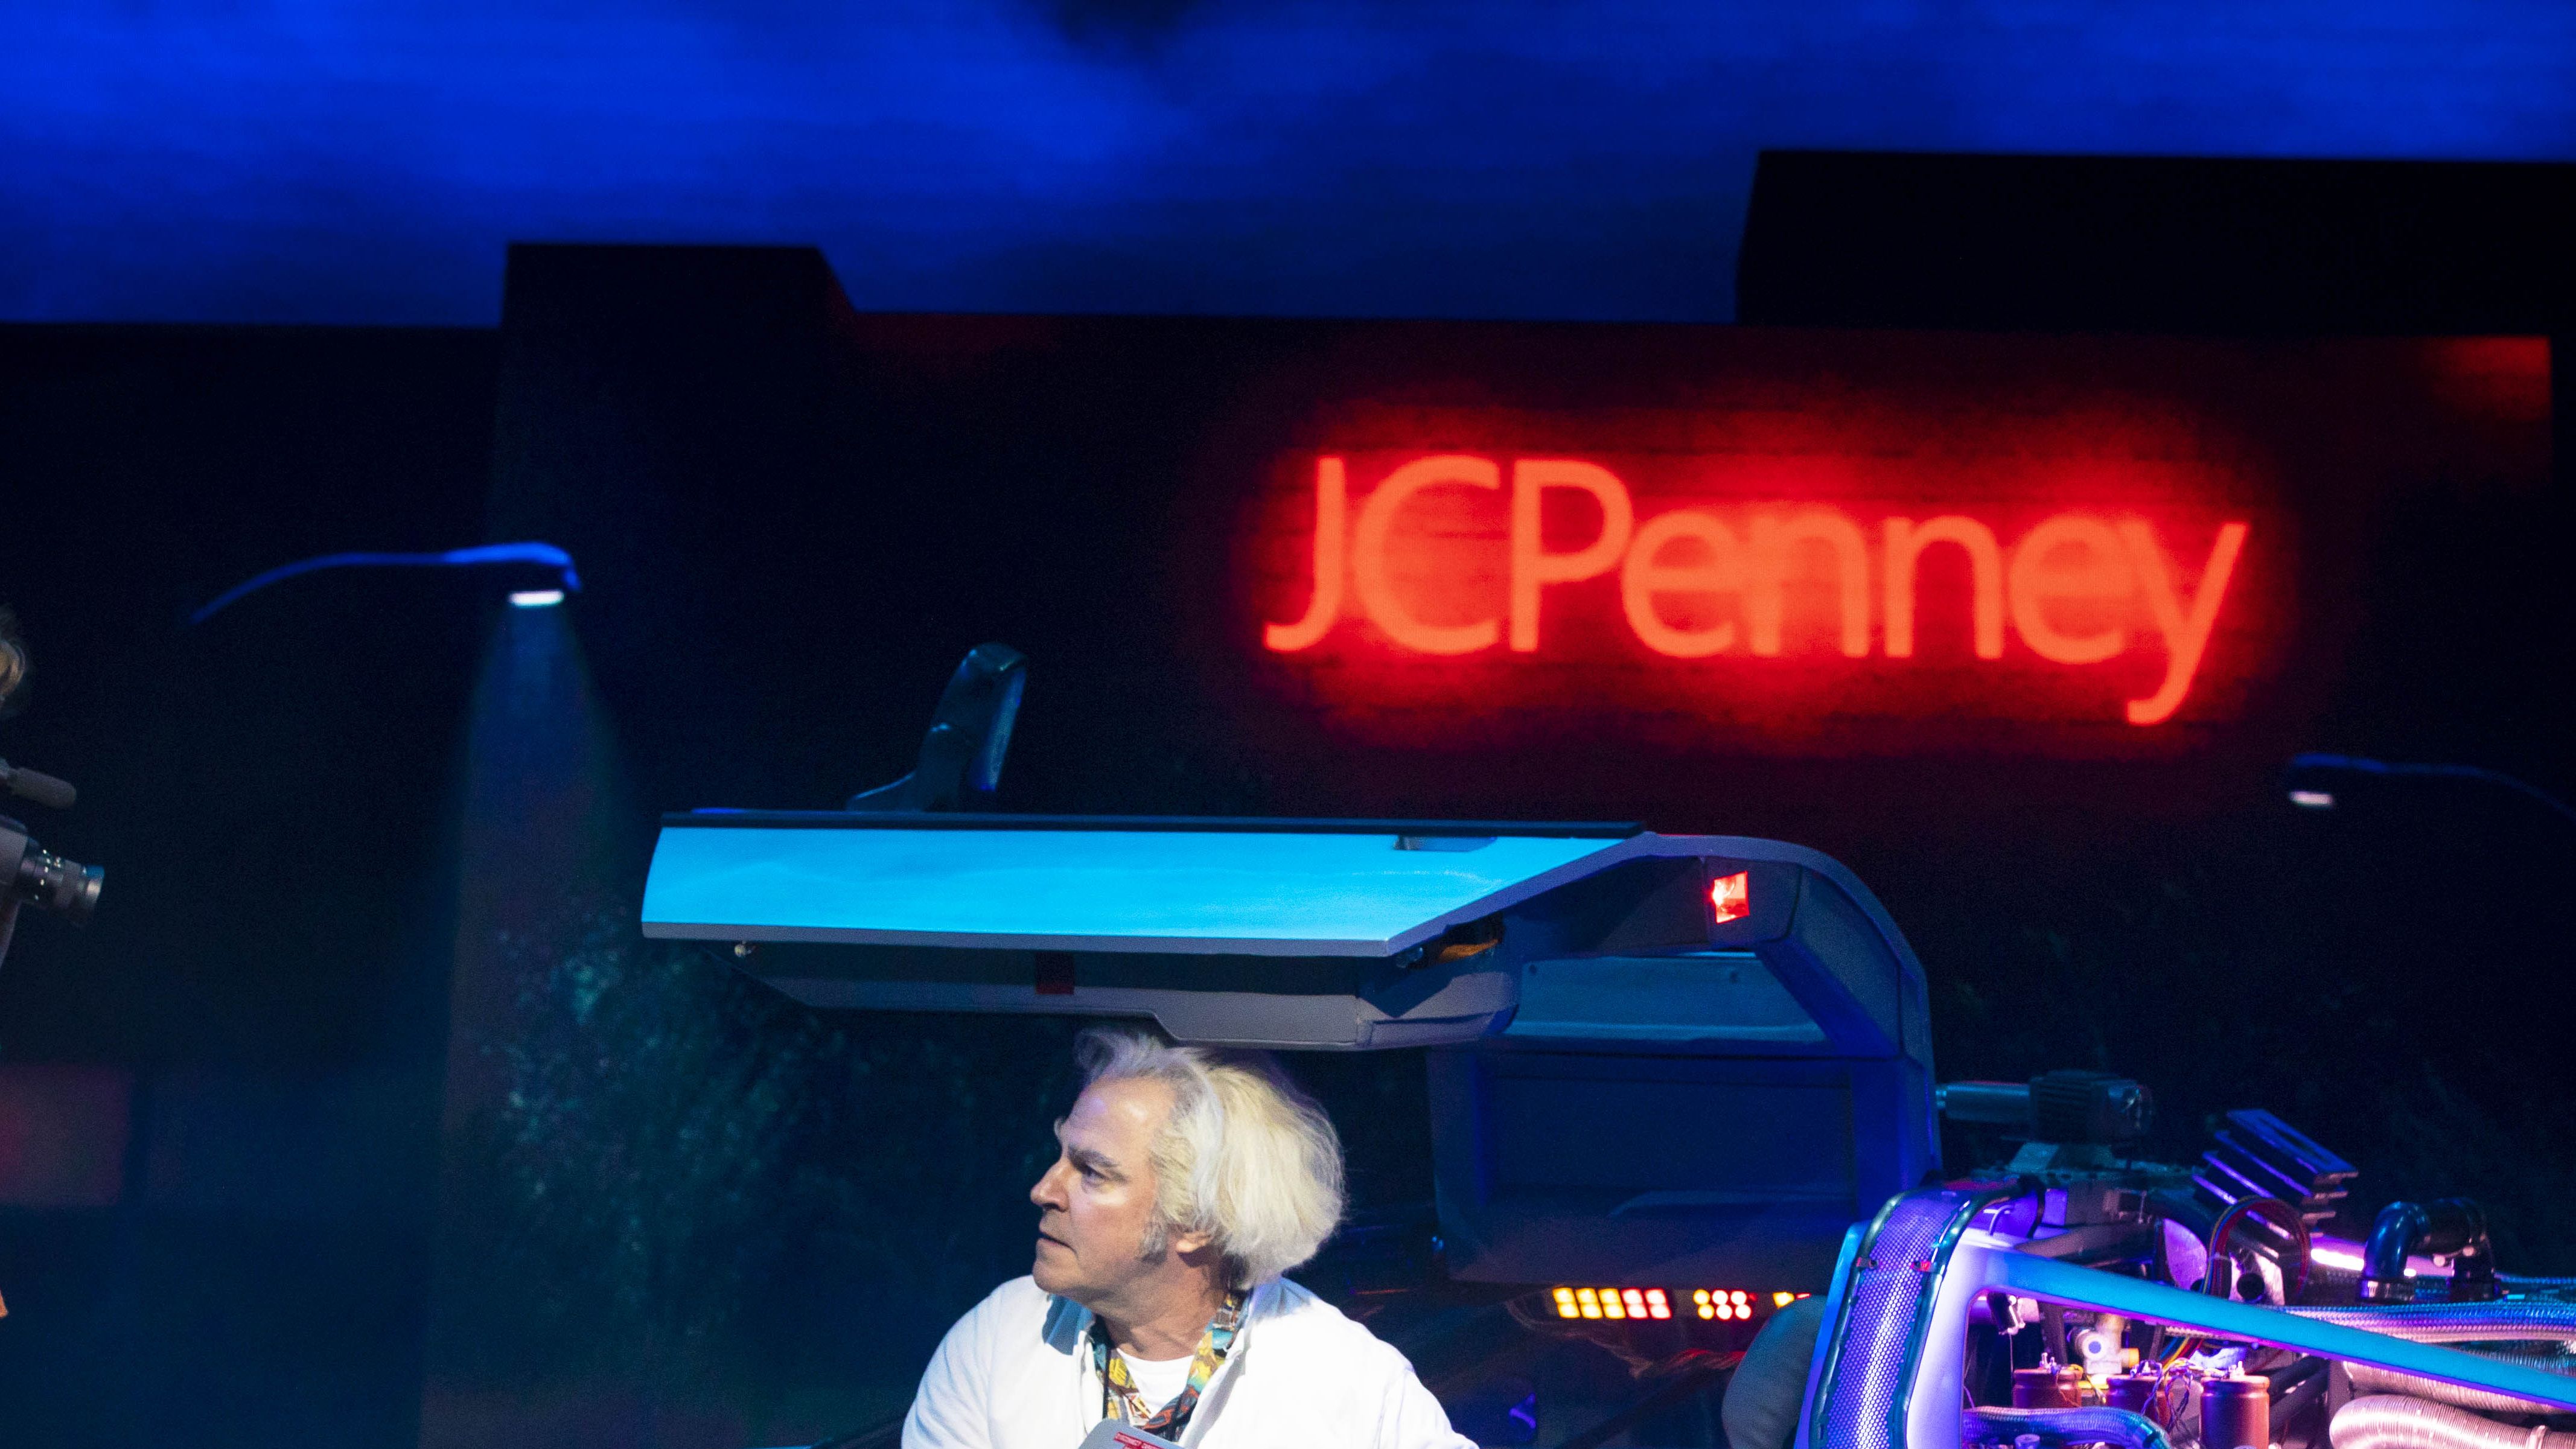 Back to the Future' Musical's Star DeLorean Car Revs Up For Broadway, back  to the future 